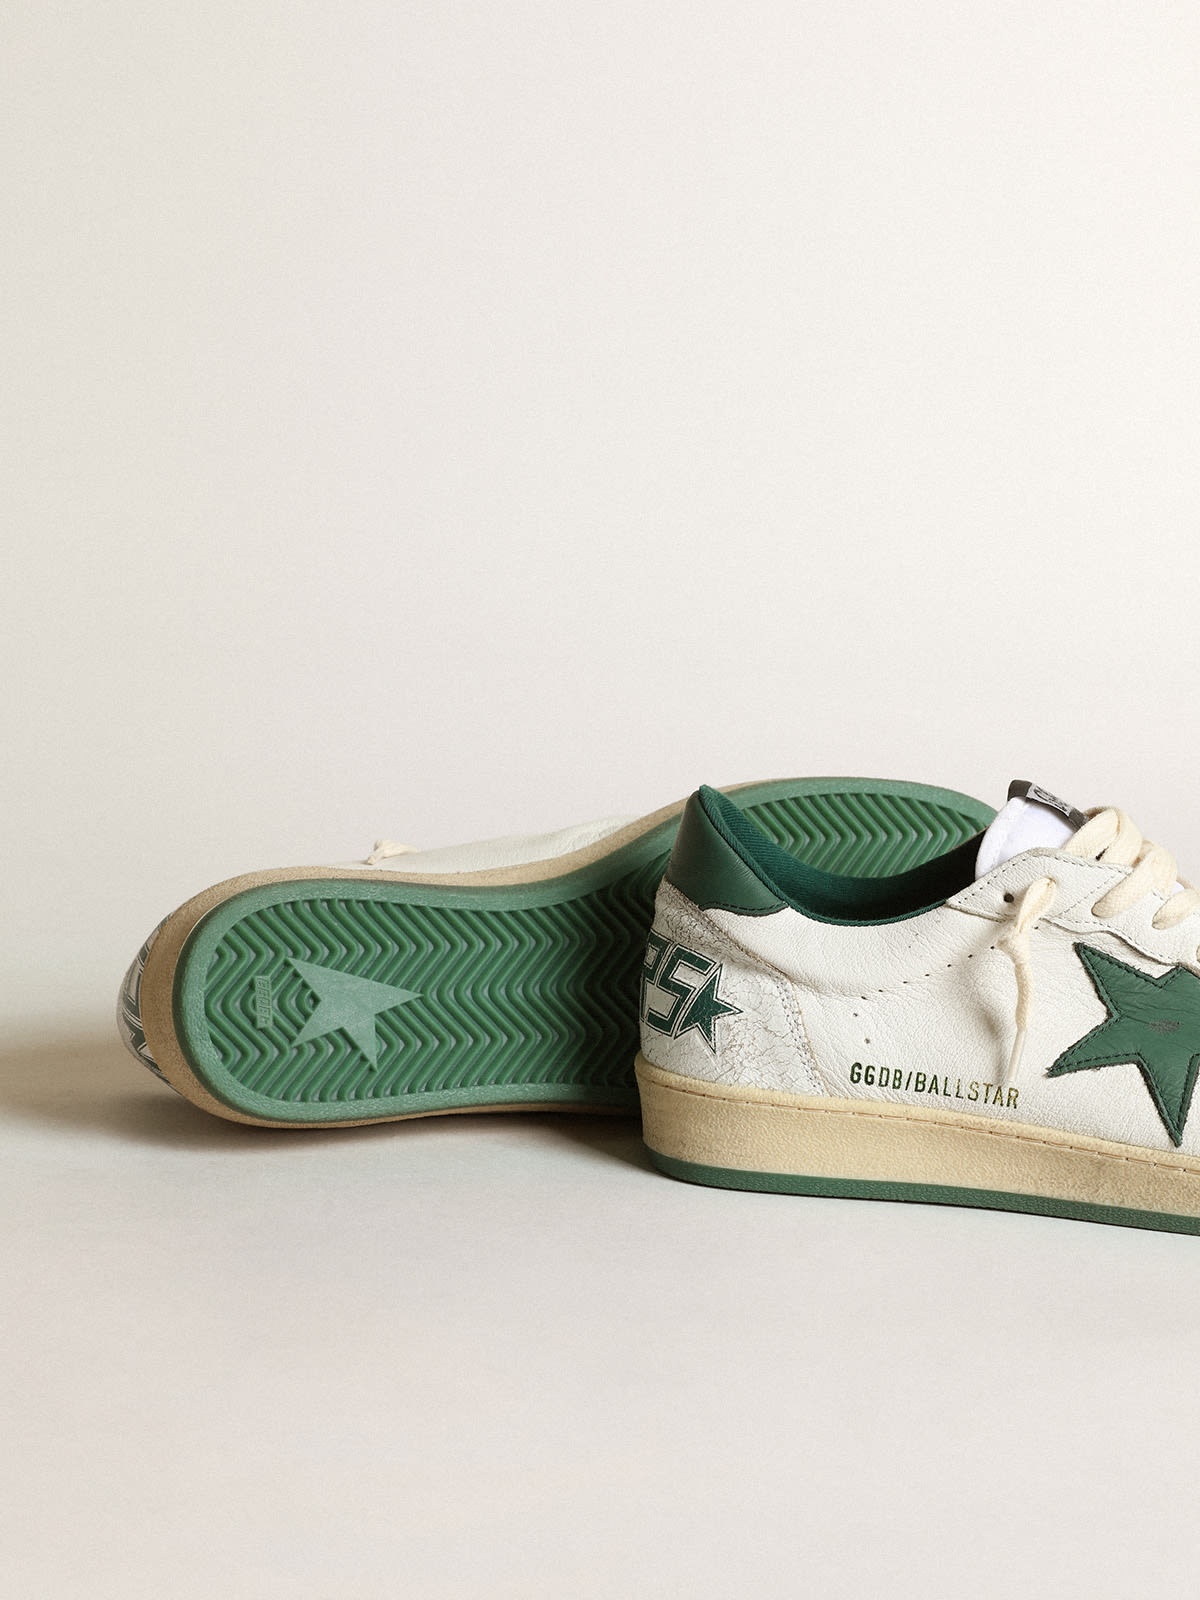 Women's Ball Star in white nappa leather with green leather star and heel tab - 3